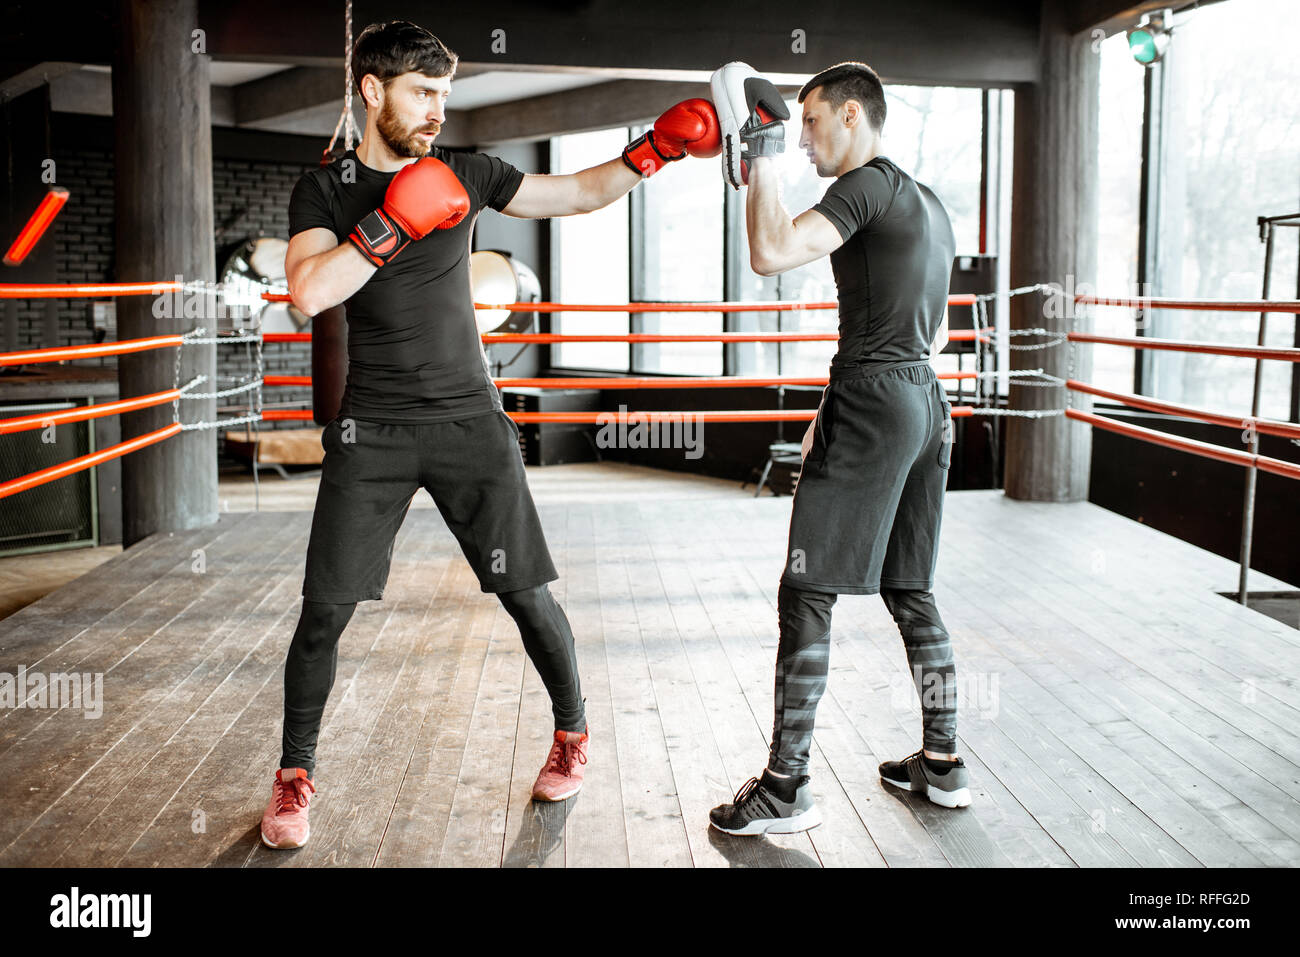 Boxing trainer showing to a man how to fight, teaching to box on the boxing ring at the gym Stock Photo